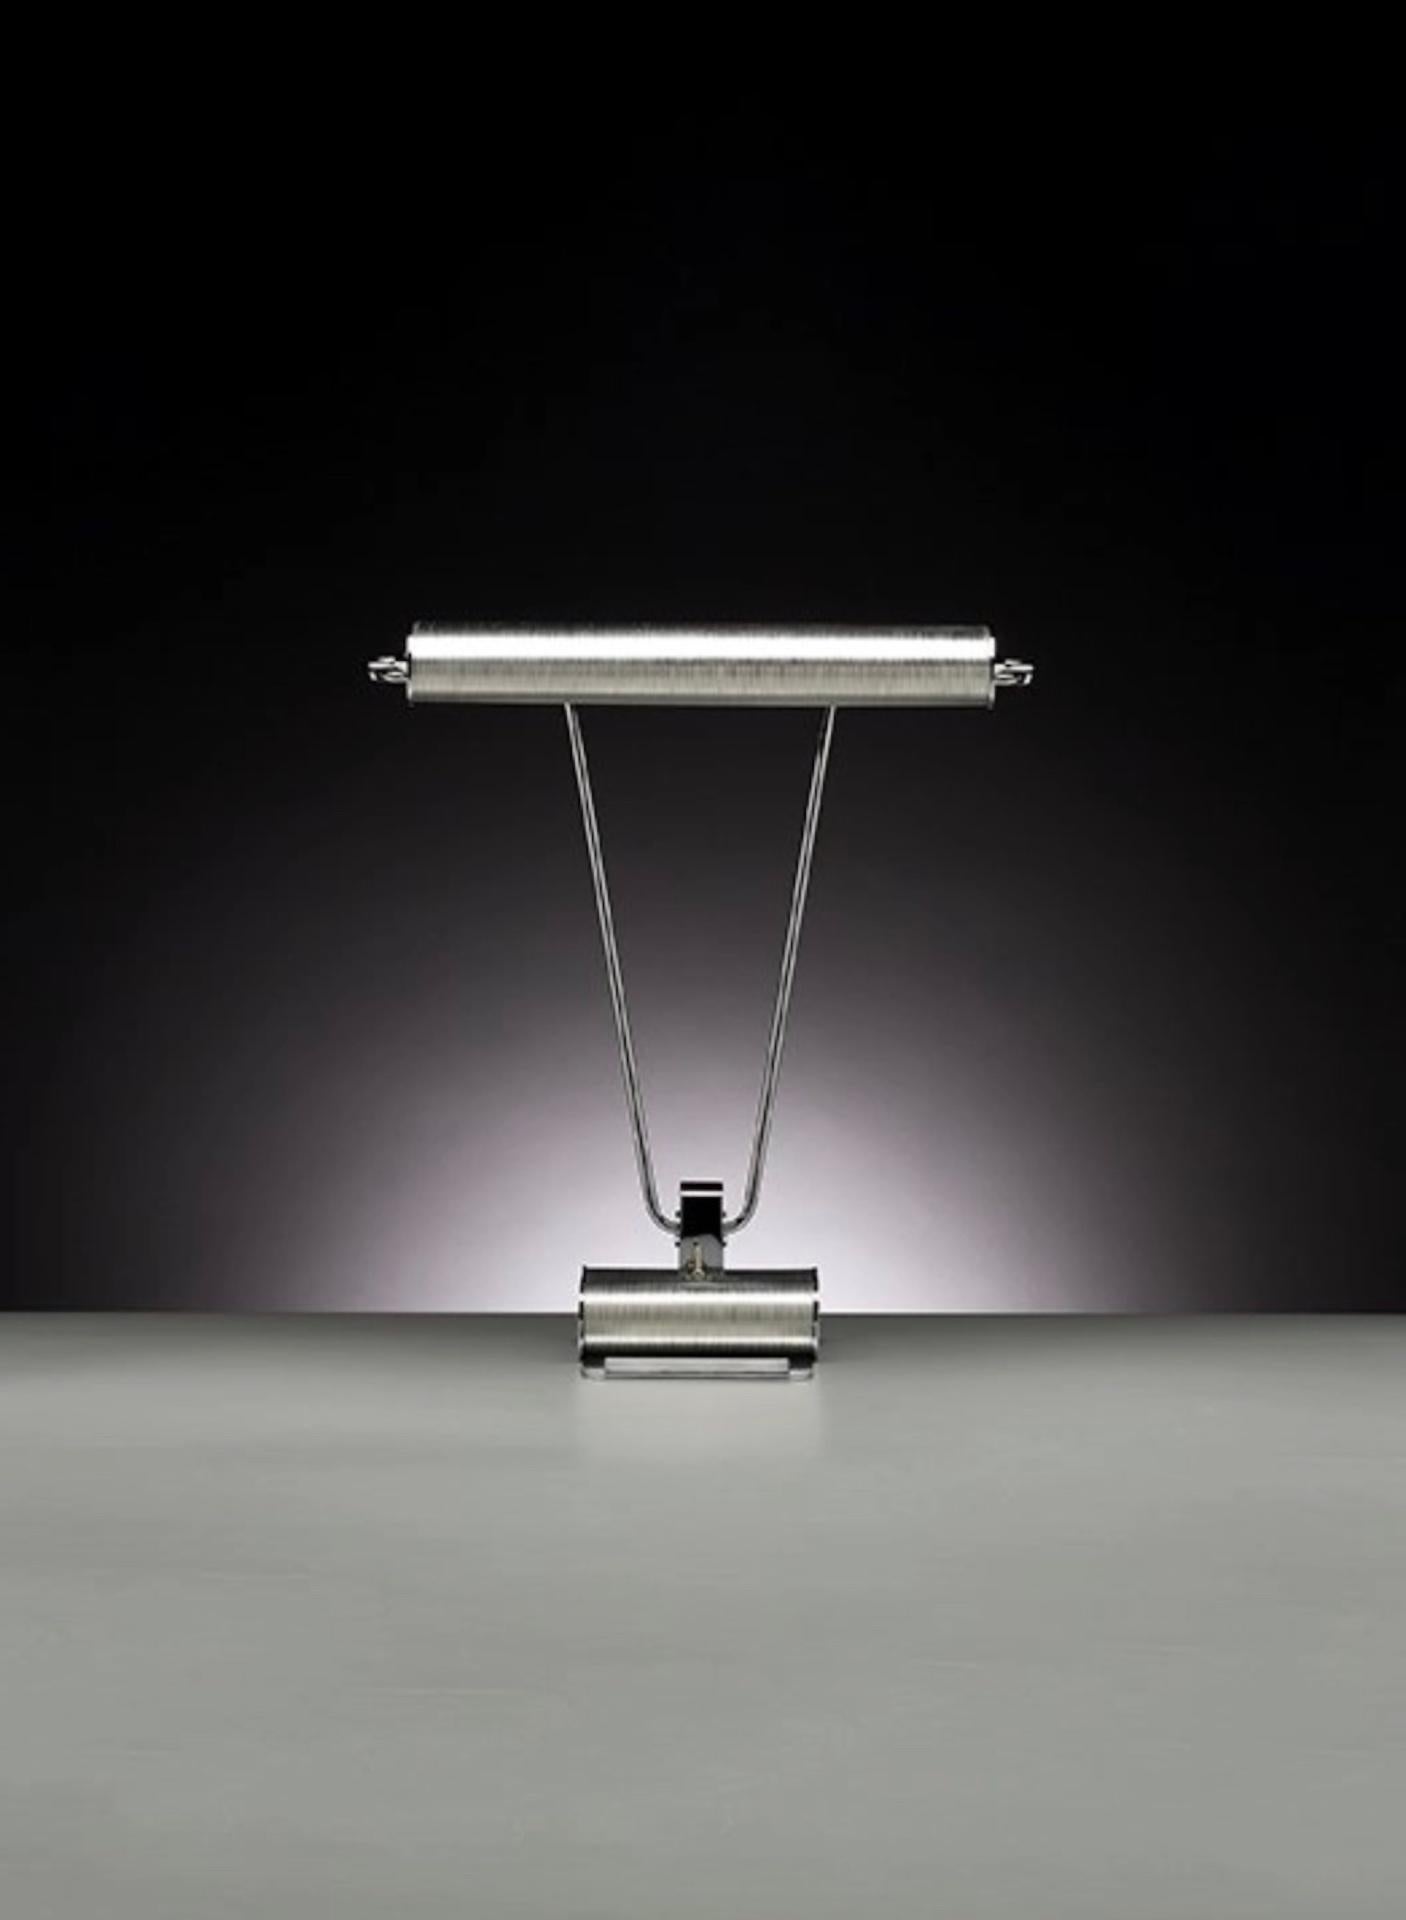 This table lamp has been redesigned based on an Art Deco model from France. Tecnolumen has retained its shape but changed its surface and technical functions. The reflector is rotatable and the linkage adjustable. The metal parts consist of clear